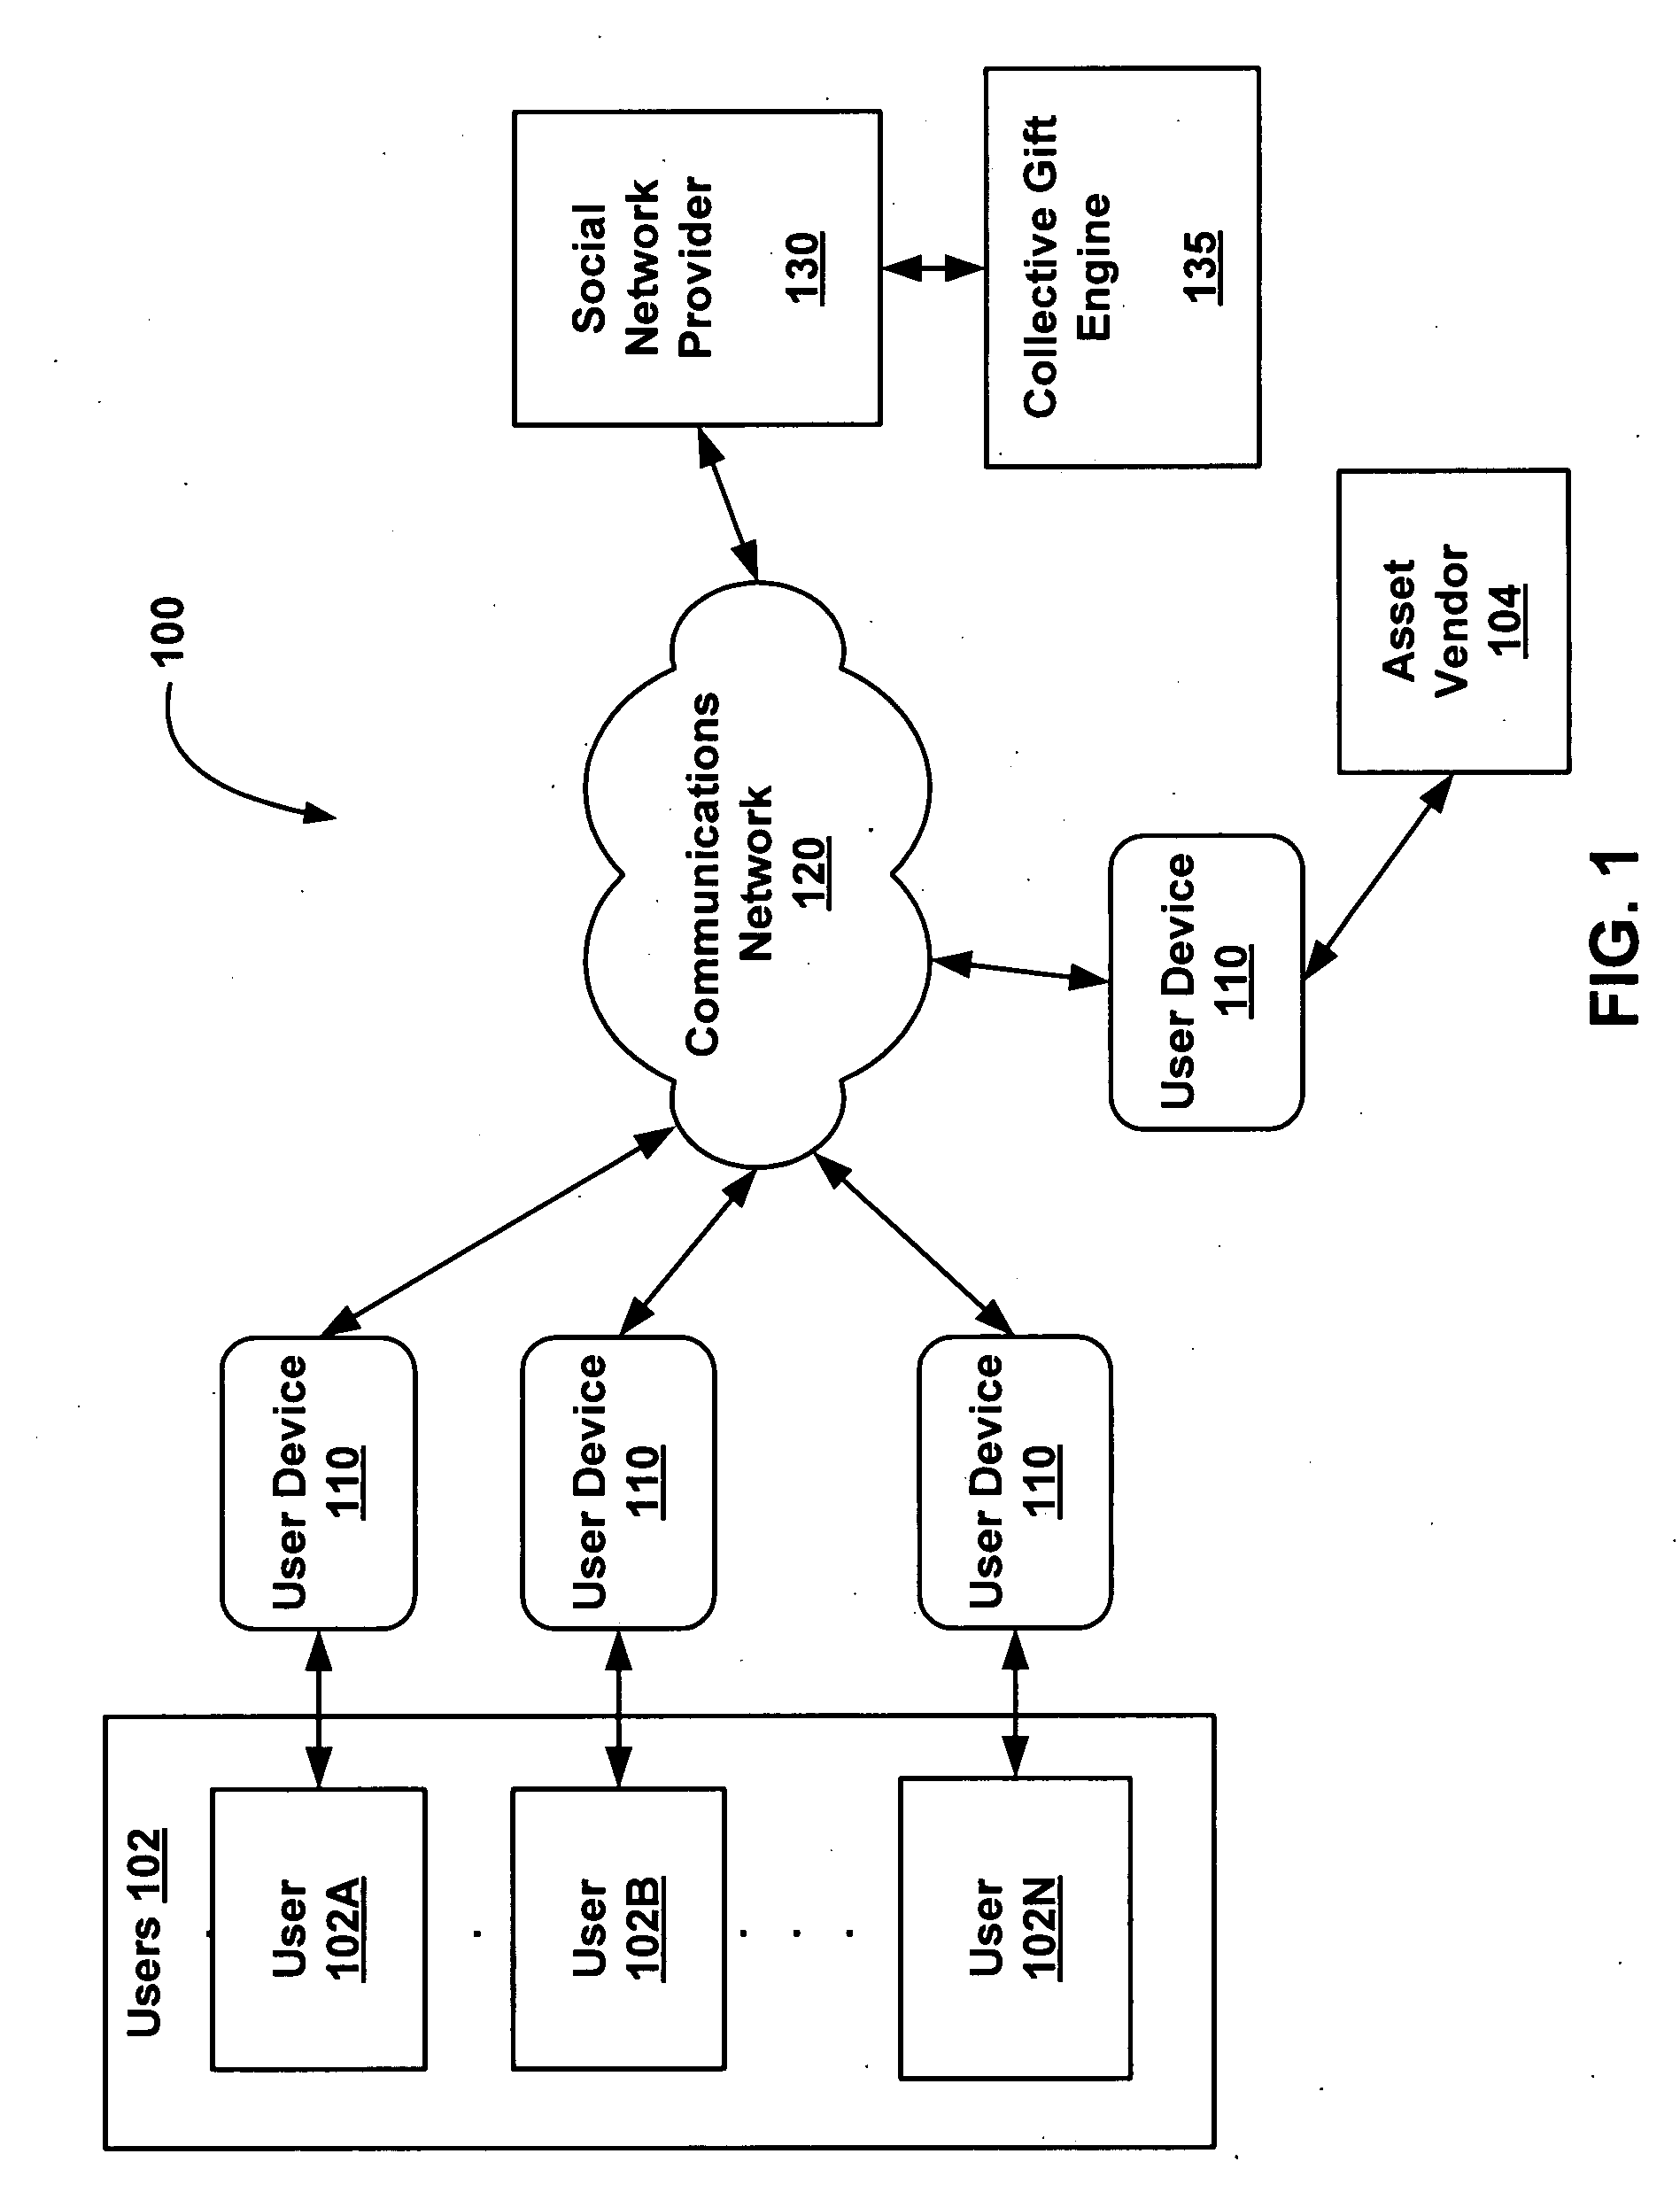 System and method for collectively giving gifts in a social network environment